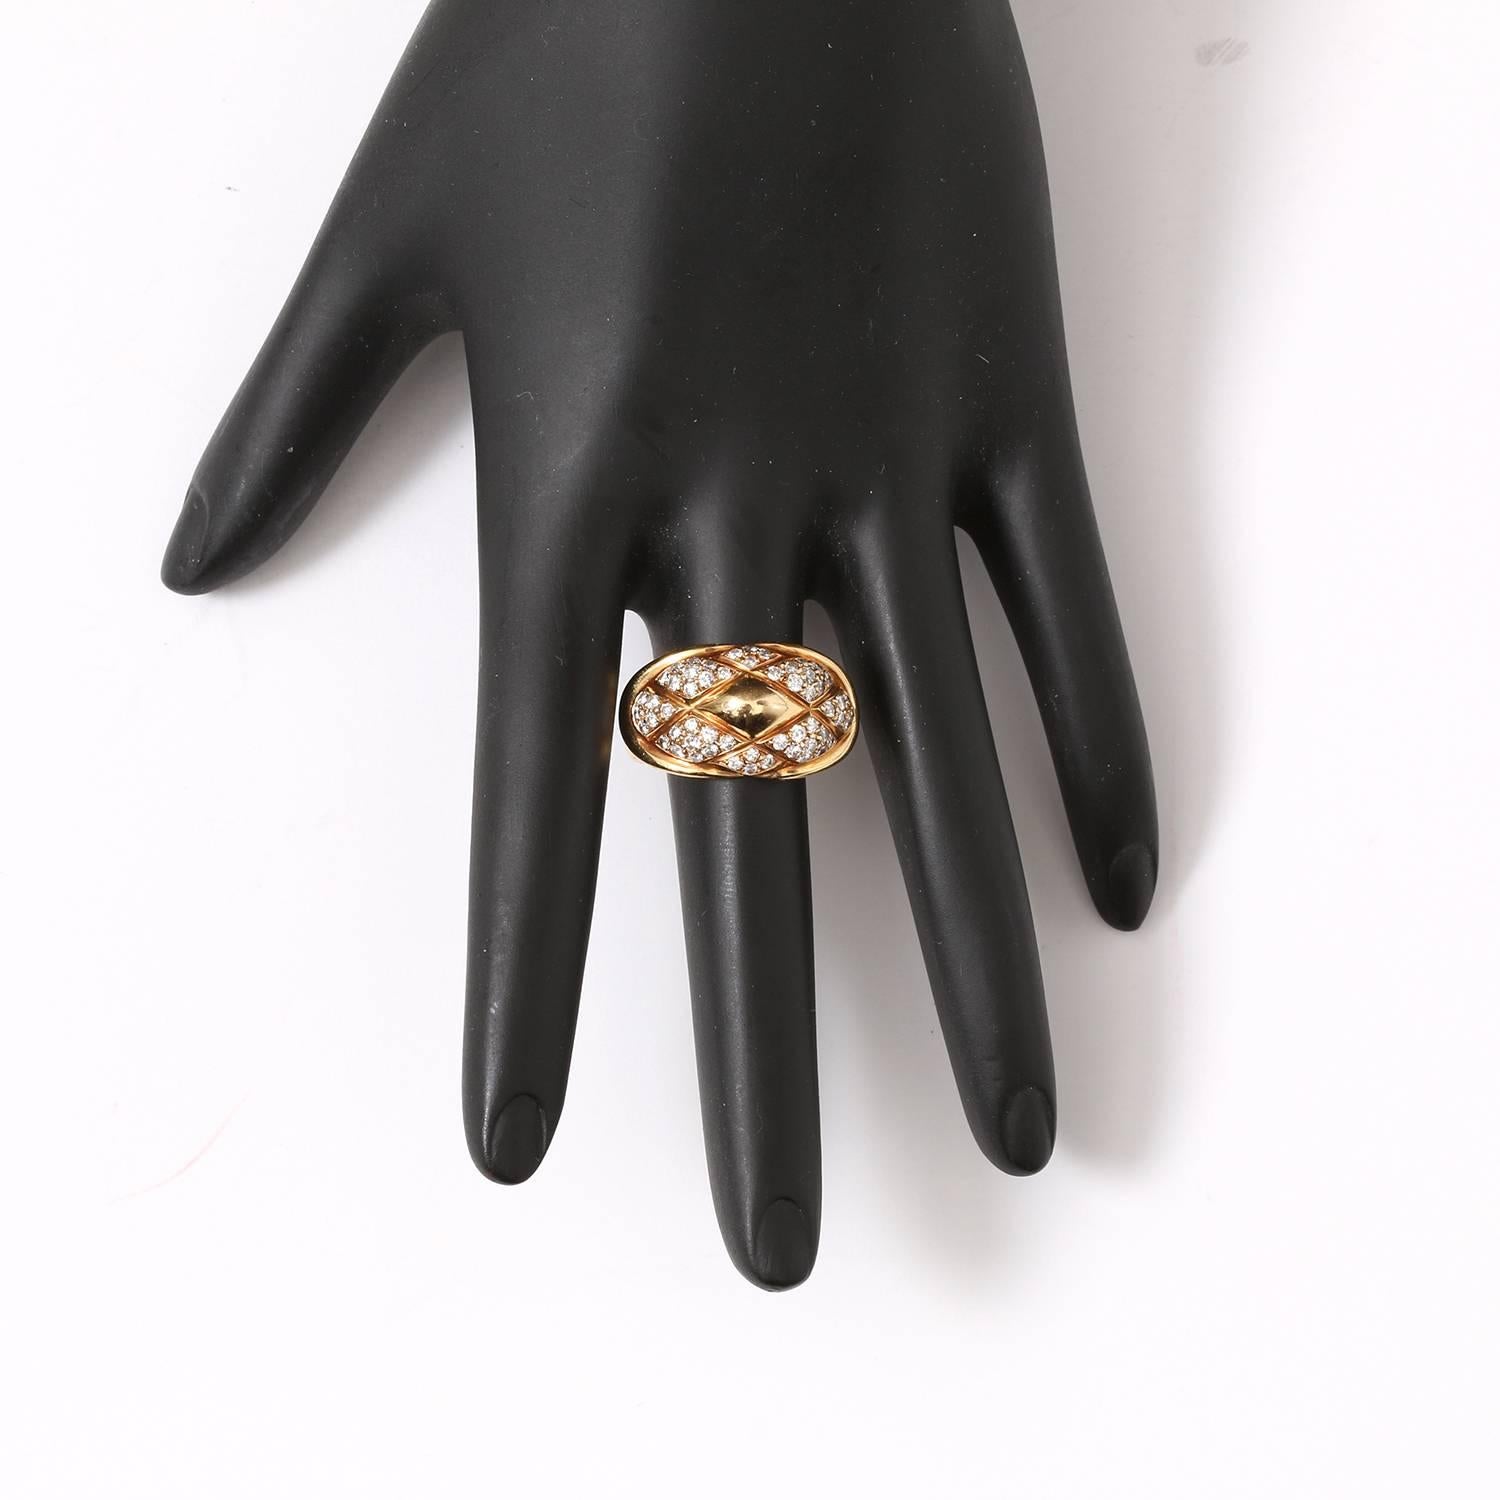 Chaumet 18K Yellow Gold Lattice Bombe Ring - 18K Yellow Gold ring with .65 cts of diamonds. Classic luxury estate piece. Ring size 7. Total weight 10.5